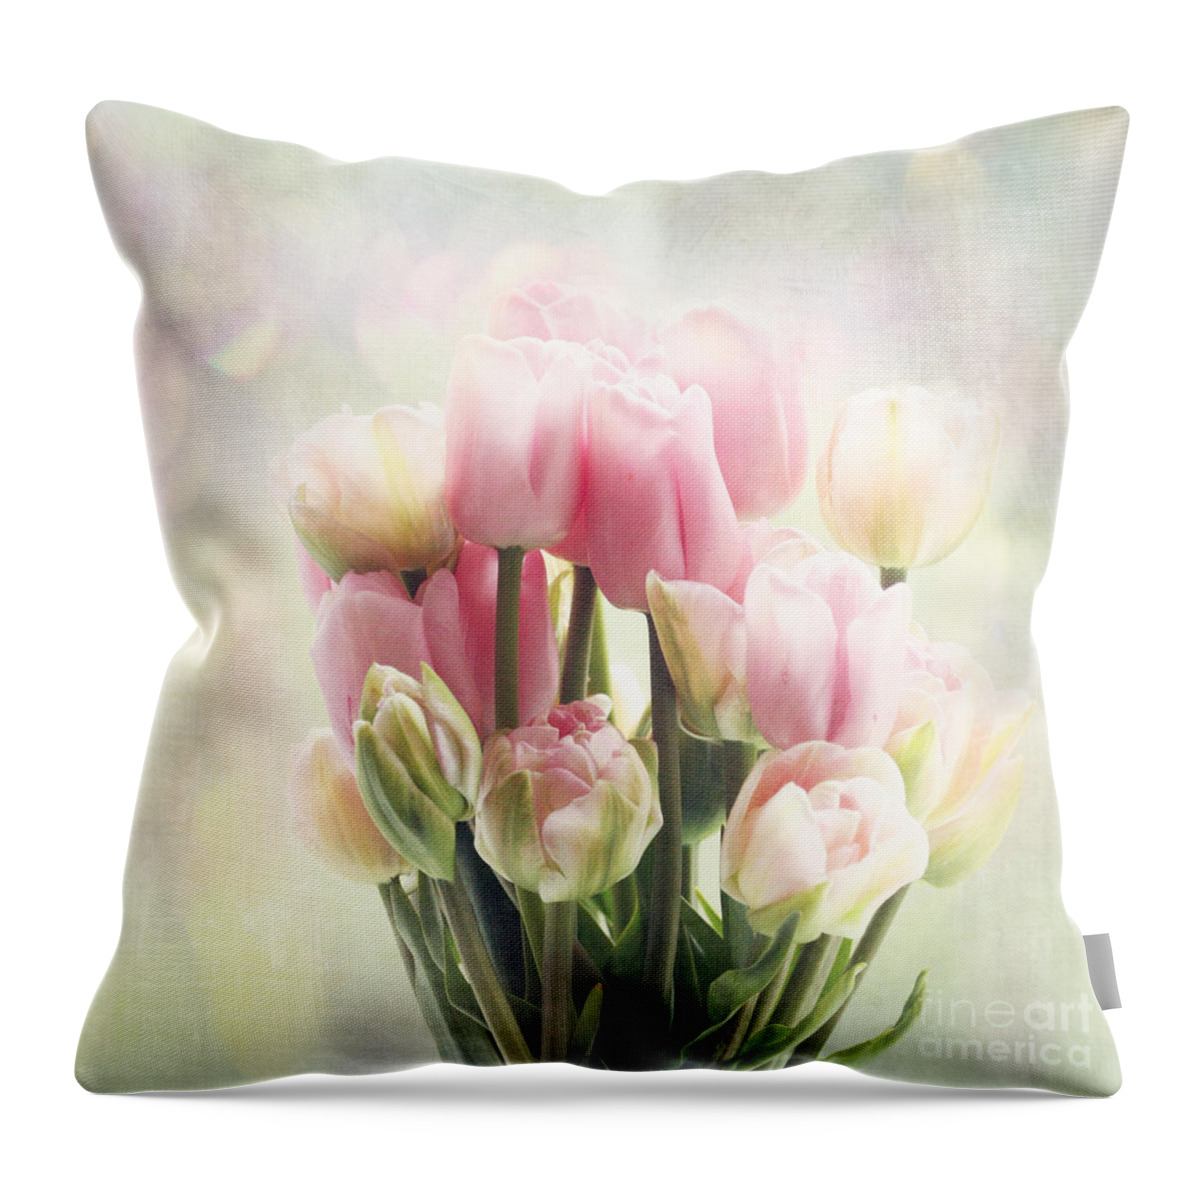 Tulips Throw Pillow featuring the photograph Tulip Bouquet by Sylvia Cook